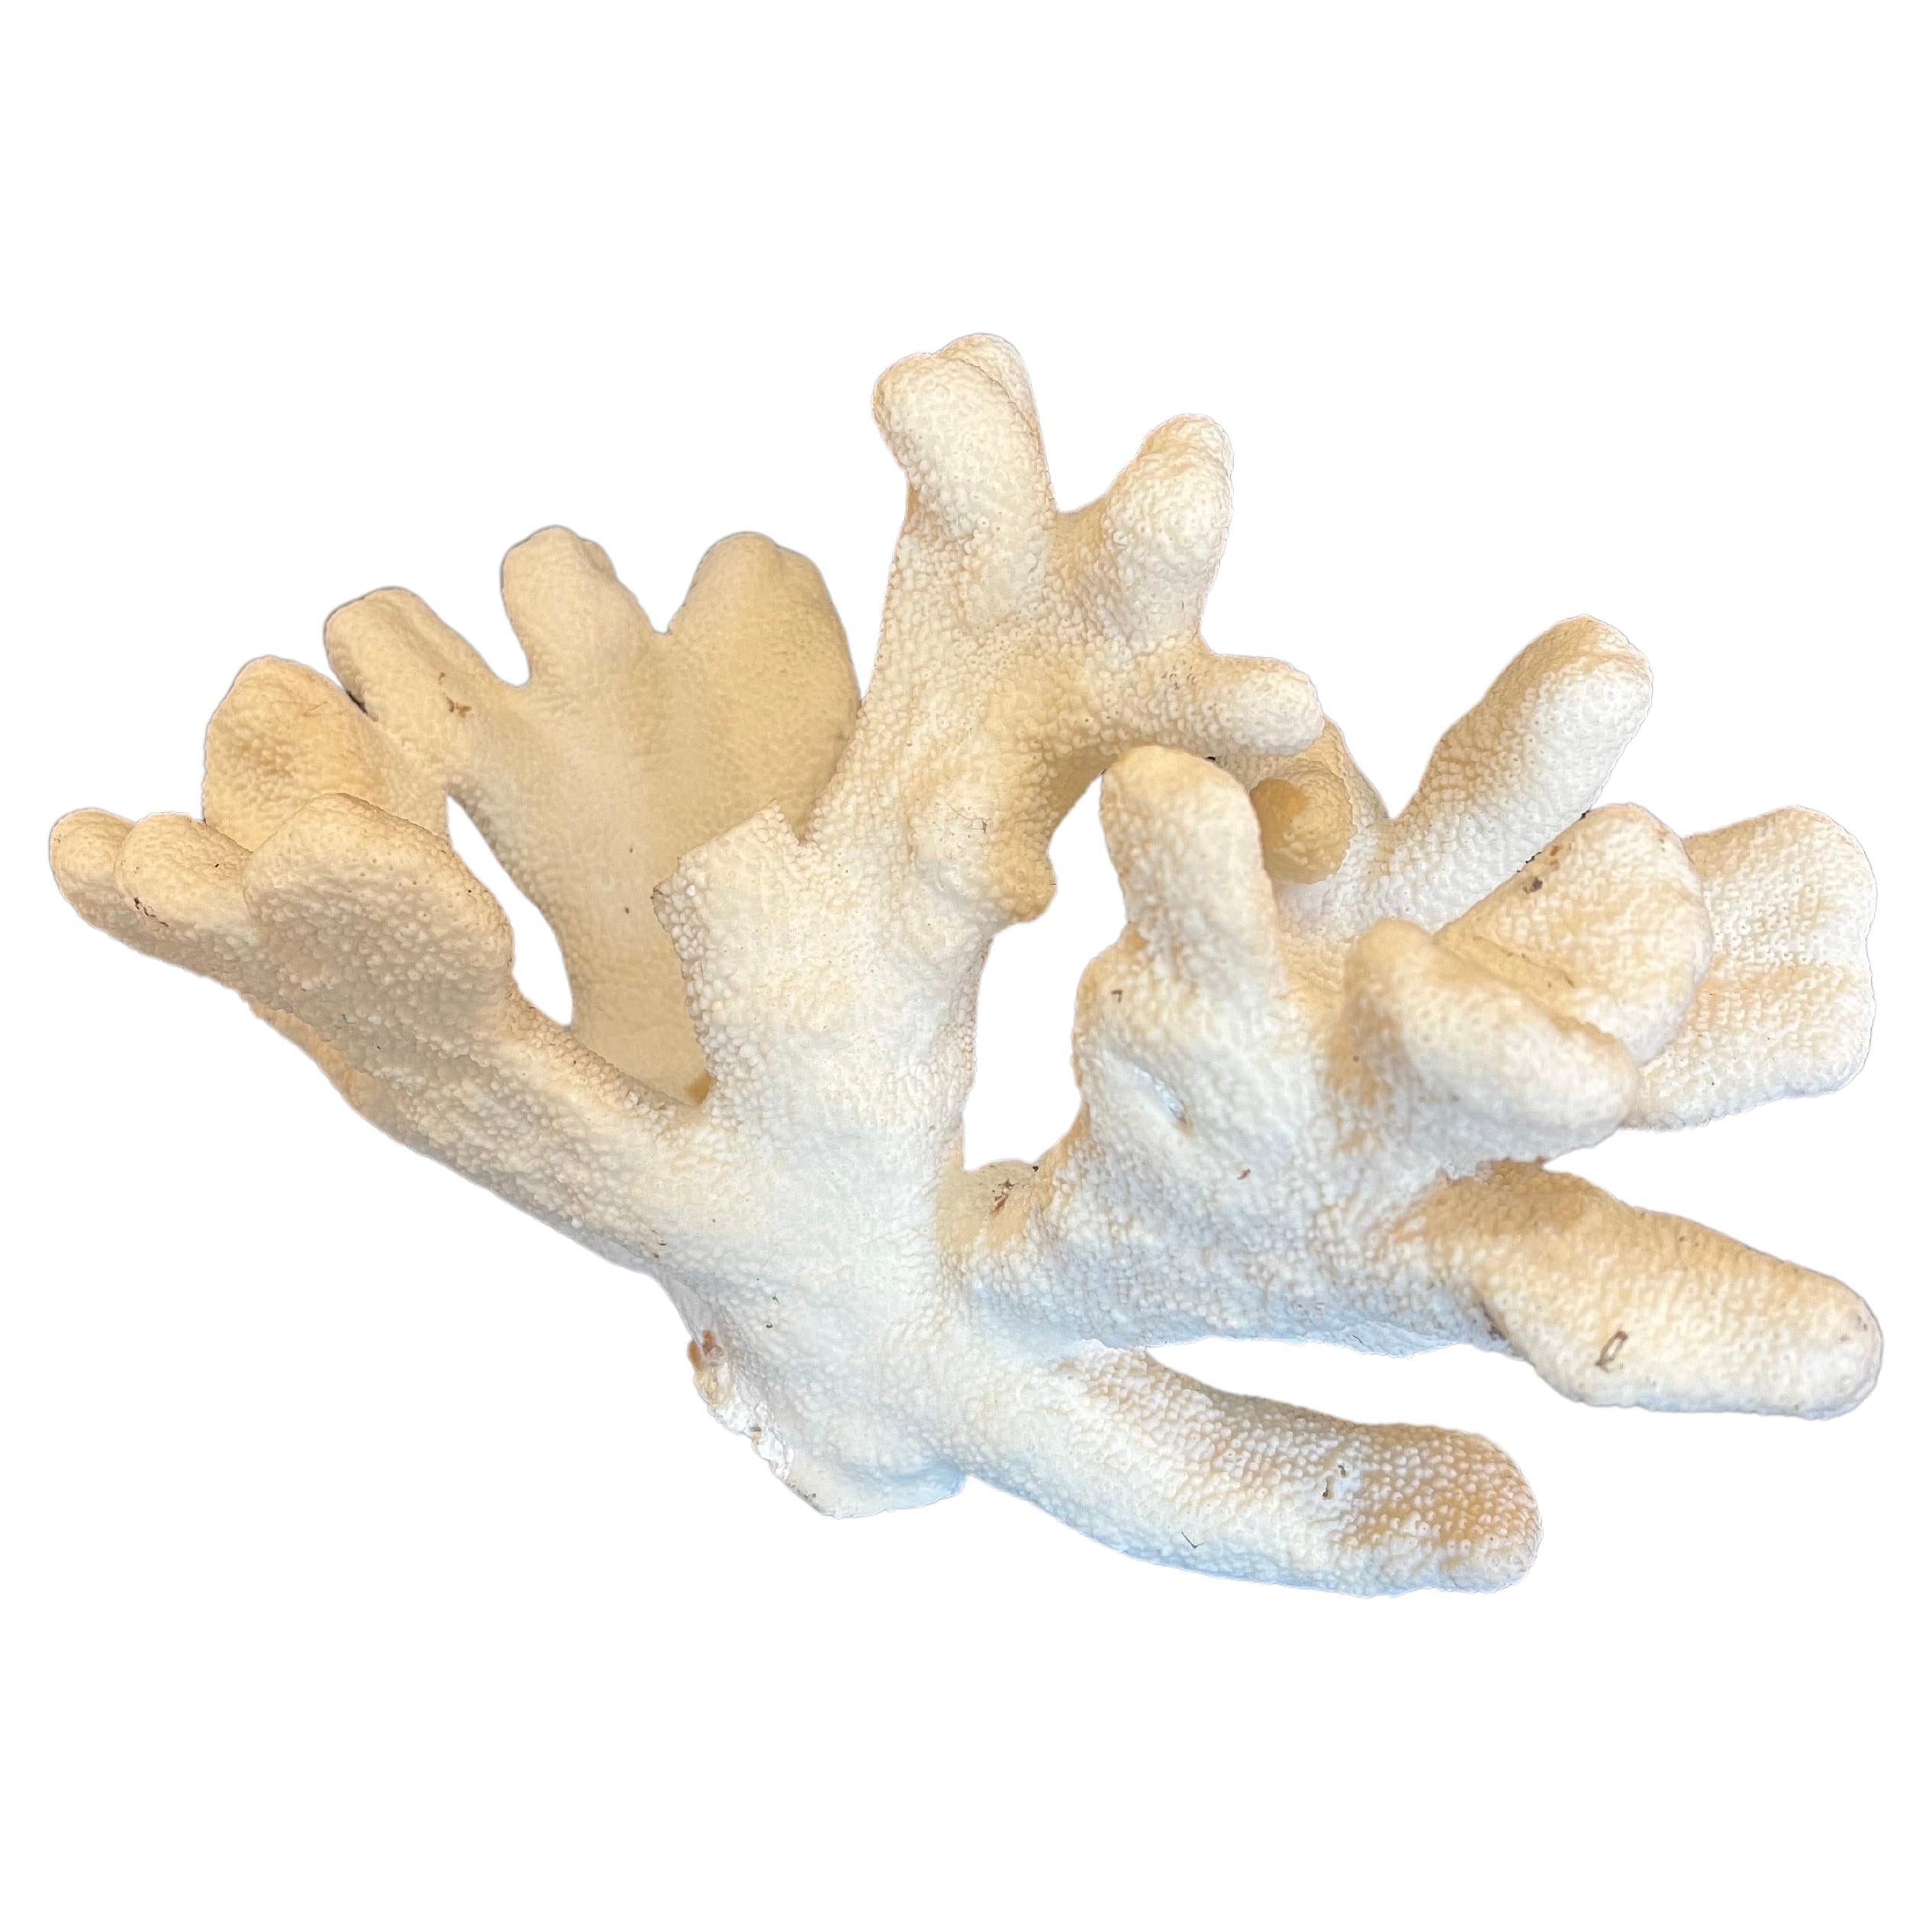 Beautiful large coral specimen in as/is condition with some broken arms due to age.